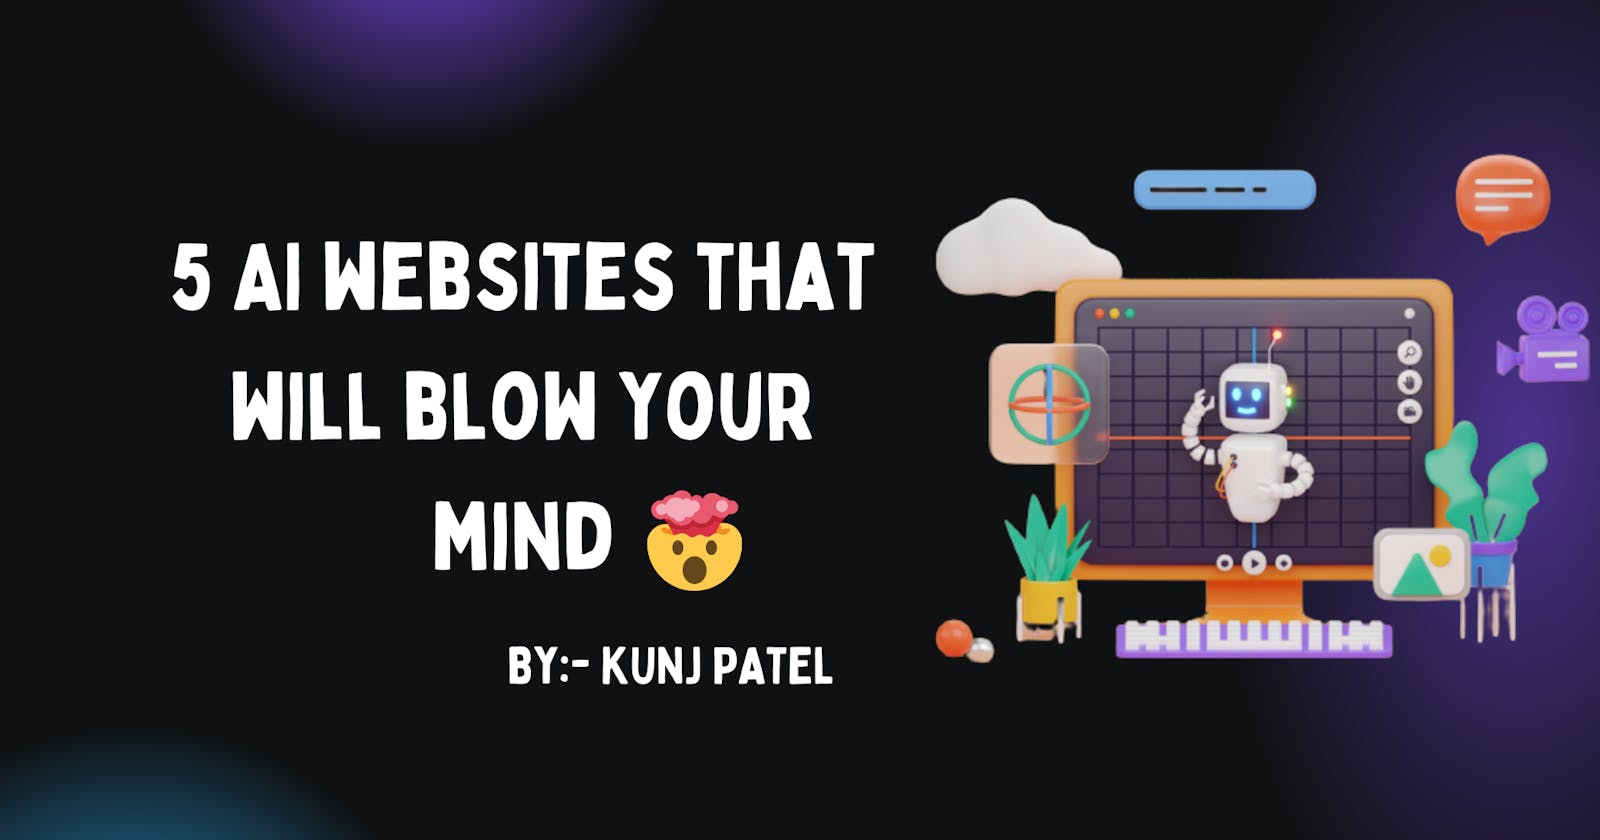 5 AI websites that will blow your mind🤯